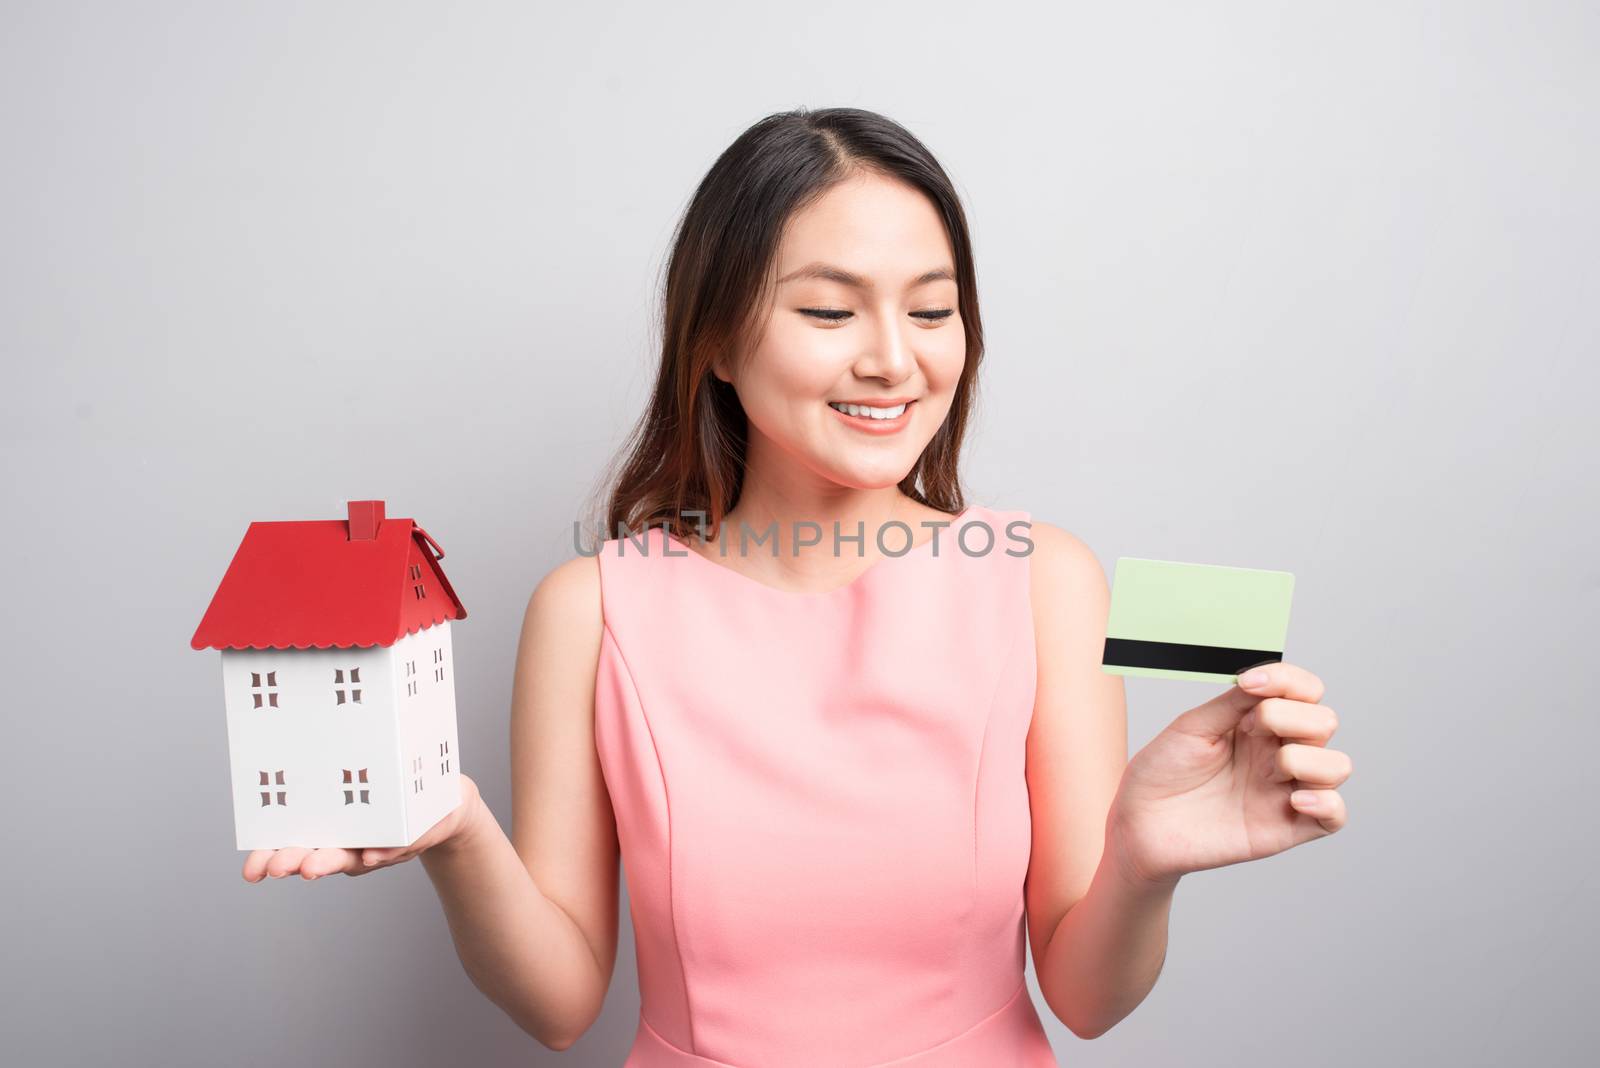 Invest in real estate concept. Woman holding small toy house and by makidotvn